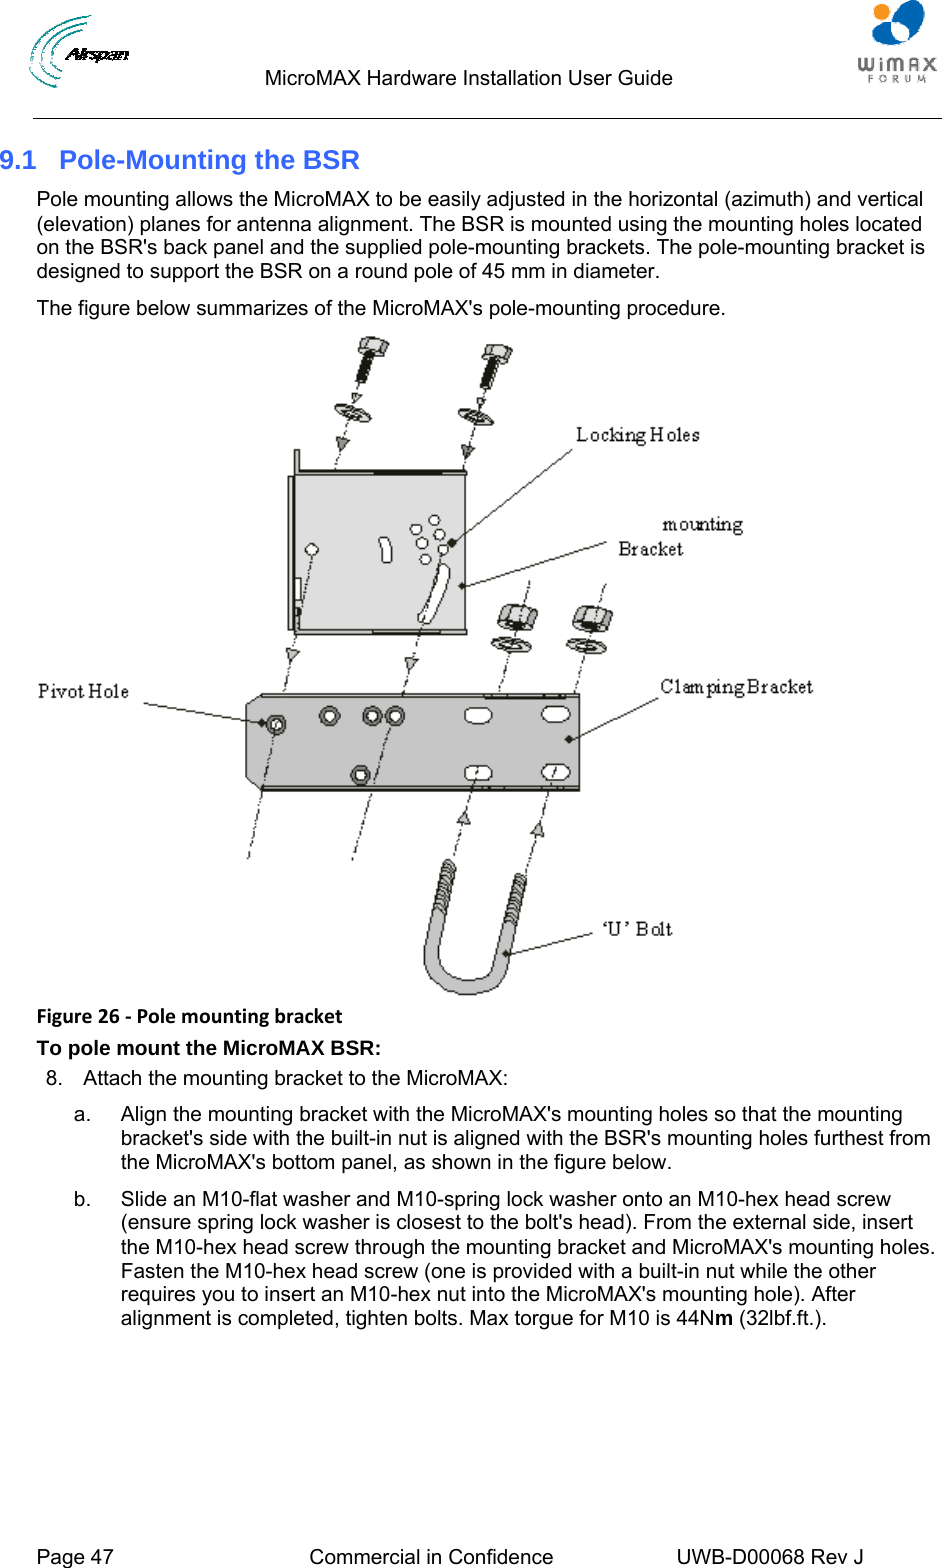                                  MicroMAX Hardware Installation User Guide  Page 47  Commercial in Confidence  UWB-D00068 Rev J   9.1  Pole-Mounting the BSR Pole mounting allows the MicroMAX to be easily adjusted in the horizontal (azimuth) and vertical (elevation) planes for antenna alignment. The BSR is mounted using the mounting holes located on the BSR&apos;s back panel and the supplied pole-mounting brackets. The pole-mounting bracket is designed to support the BSR on a round pole of 45 mm in diameter. The figure below summarizes of the MicroMAX&apos;s pole-mounting procedure.  Figure26‐PolemountingbracketTo pole mount the MicroMAX BSR: 8.  Attach the mounting bracket to the MicroMAX: a.  Align the mounting bracket with the MicroMAX&apos;s mounting holes so that the mounting bracket&apos;s side with the built-in nut is aligned with the BSR&apos;s mounting holes furthest from the MicroMAX&apos;s bottom panel, as shown in the figure below. b.  Slide an M10-flat washer and M10-spring lock washer onto an M10-hex head screw (ensure spring lock washer is closest to the bolt&apos;s head). From the external side, insert the M10-hex head screw through the mounting bracket and MicroMAX&apos;s mounting holes. Fasten the M10-hex head screw (one is provided with a built-in nut while the other requires you to insert an M10-hex nut into the MicroMAX&apos;s mounting hole). After alignment is completed, tighten bolts. Max torgue for M10 is 44Nm (32lbf.ft.). 